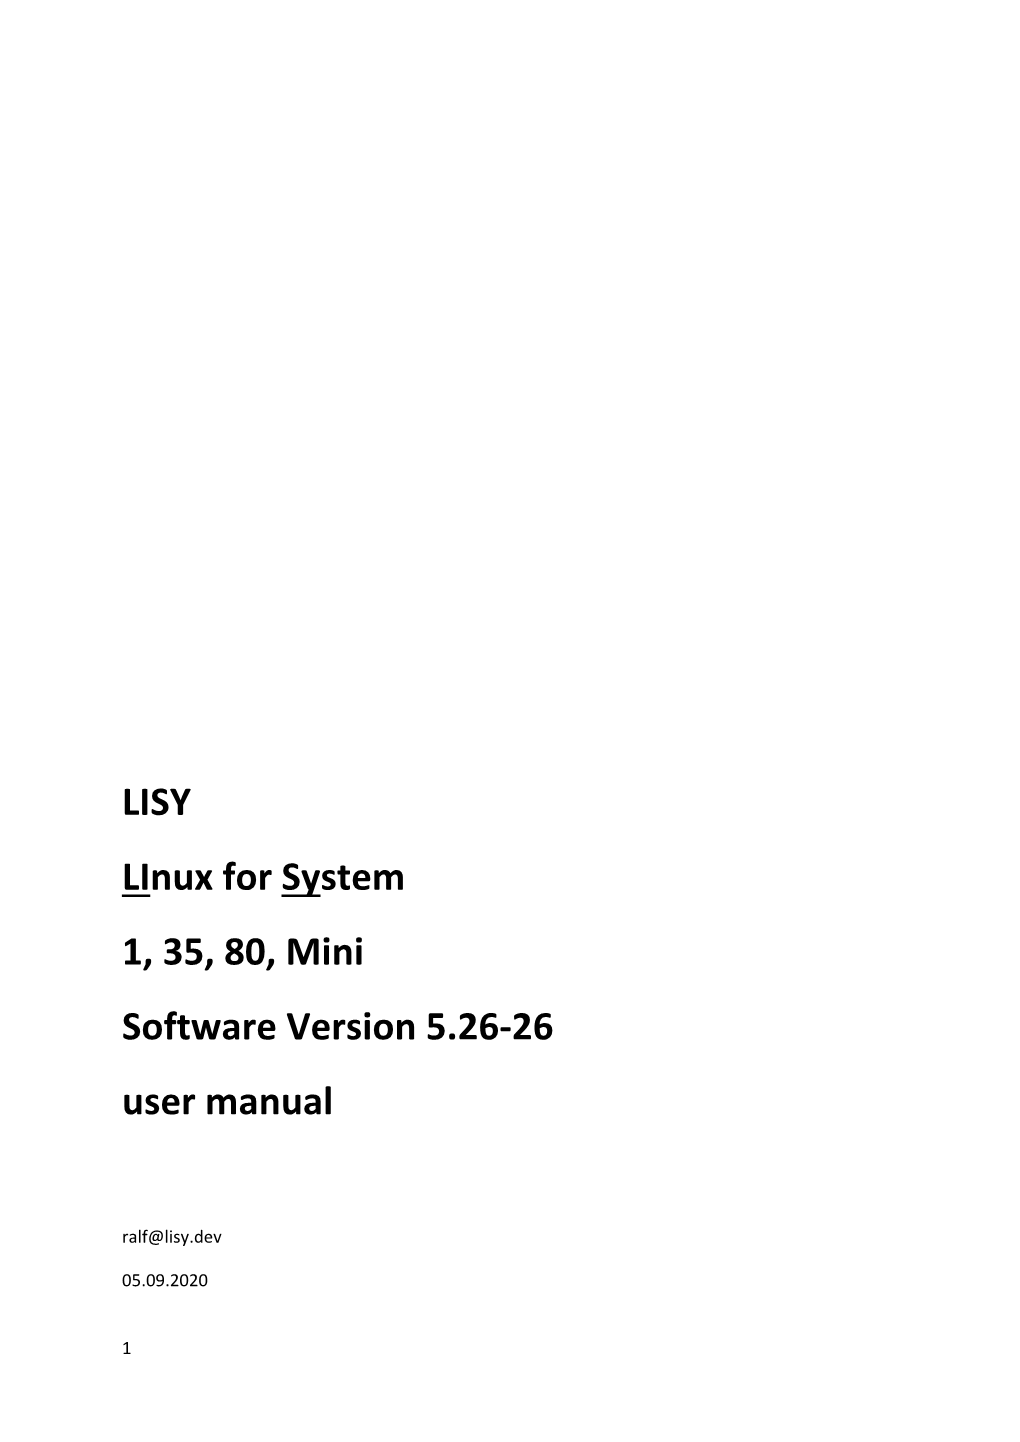 LISY Linux for System 1, 35, 80, Mini Software Version 5.26-26 User Manual